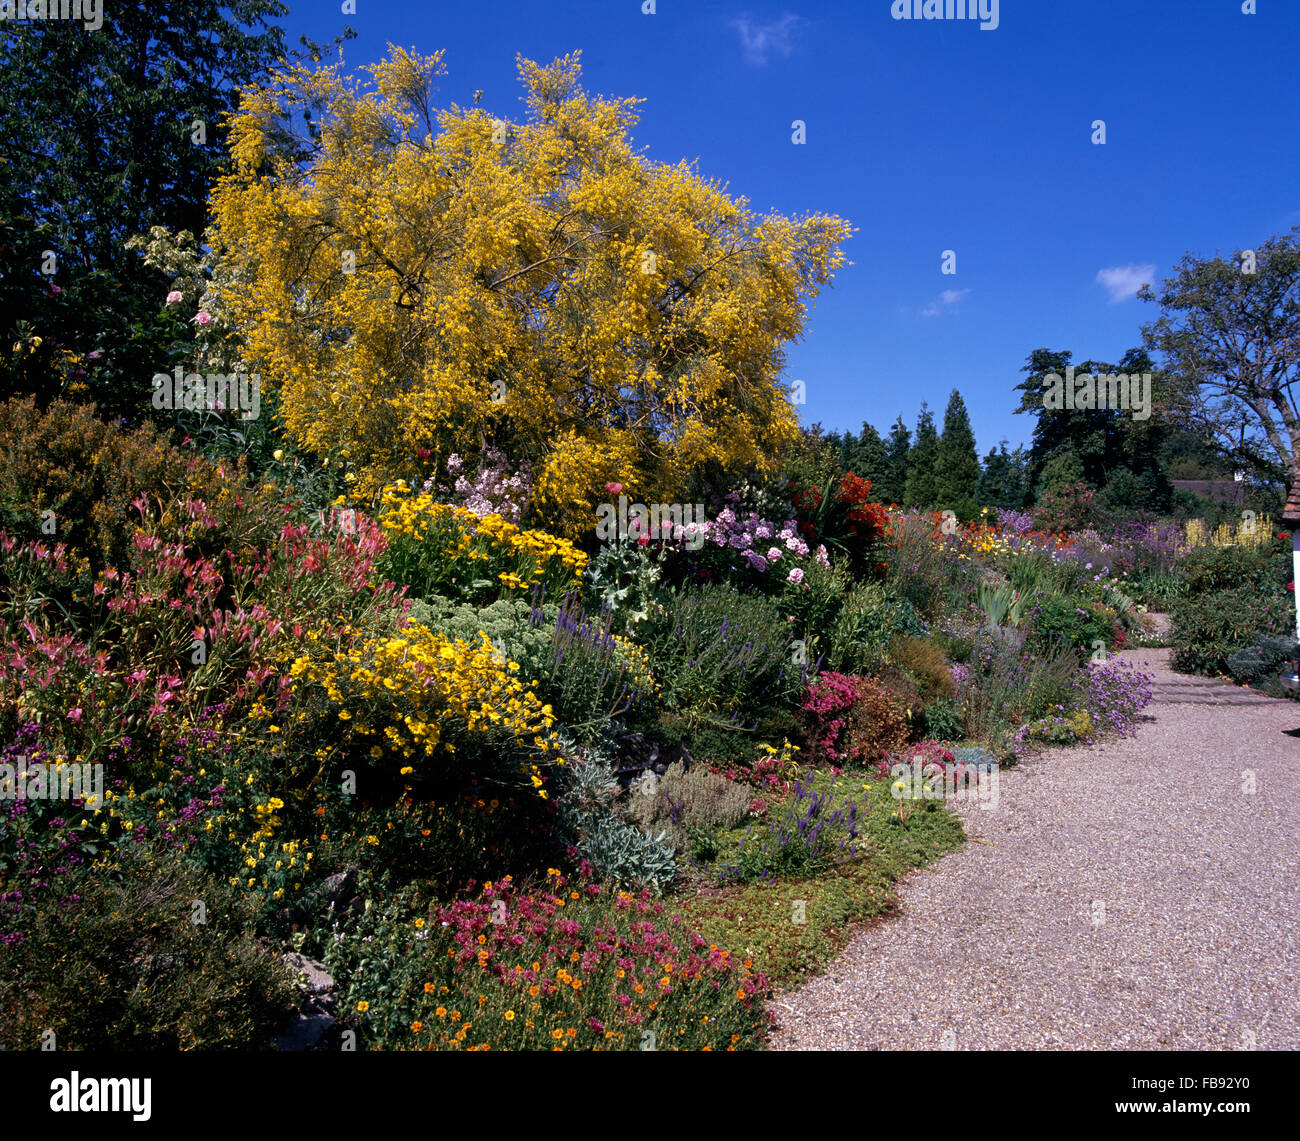 Tall yellow cytisus growing in wide border beside gravel path in large country garden Stock Photo